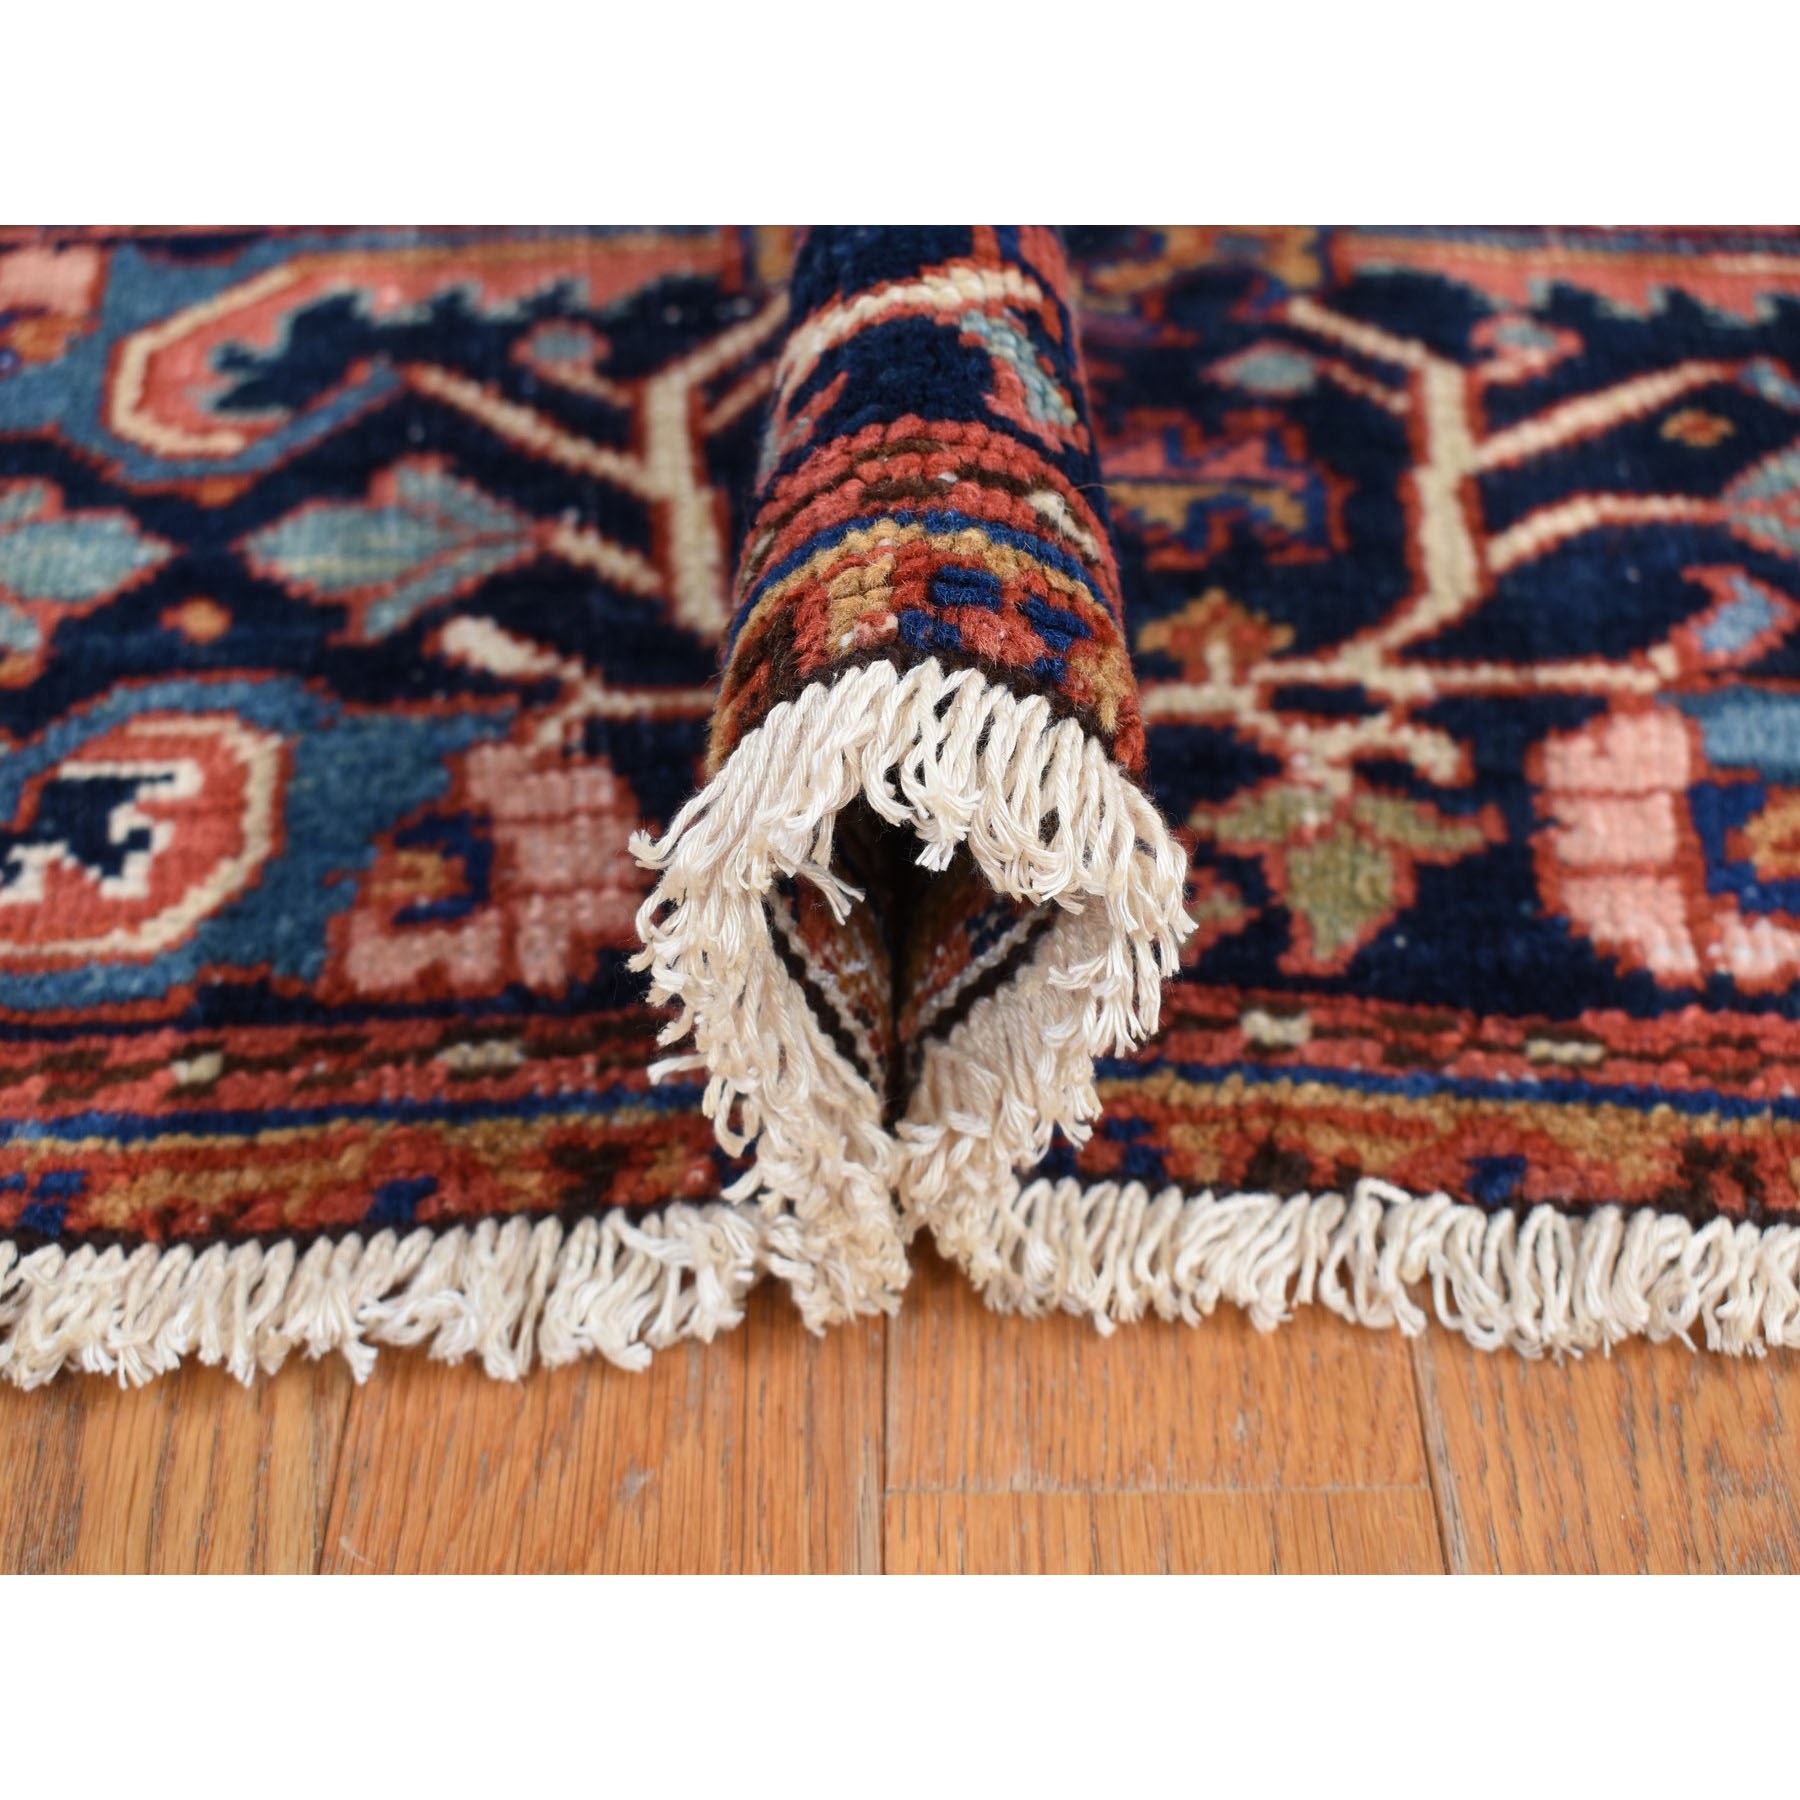  Wool Hand-Knotted Area Rug 8'6